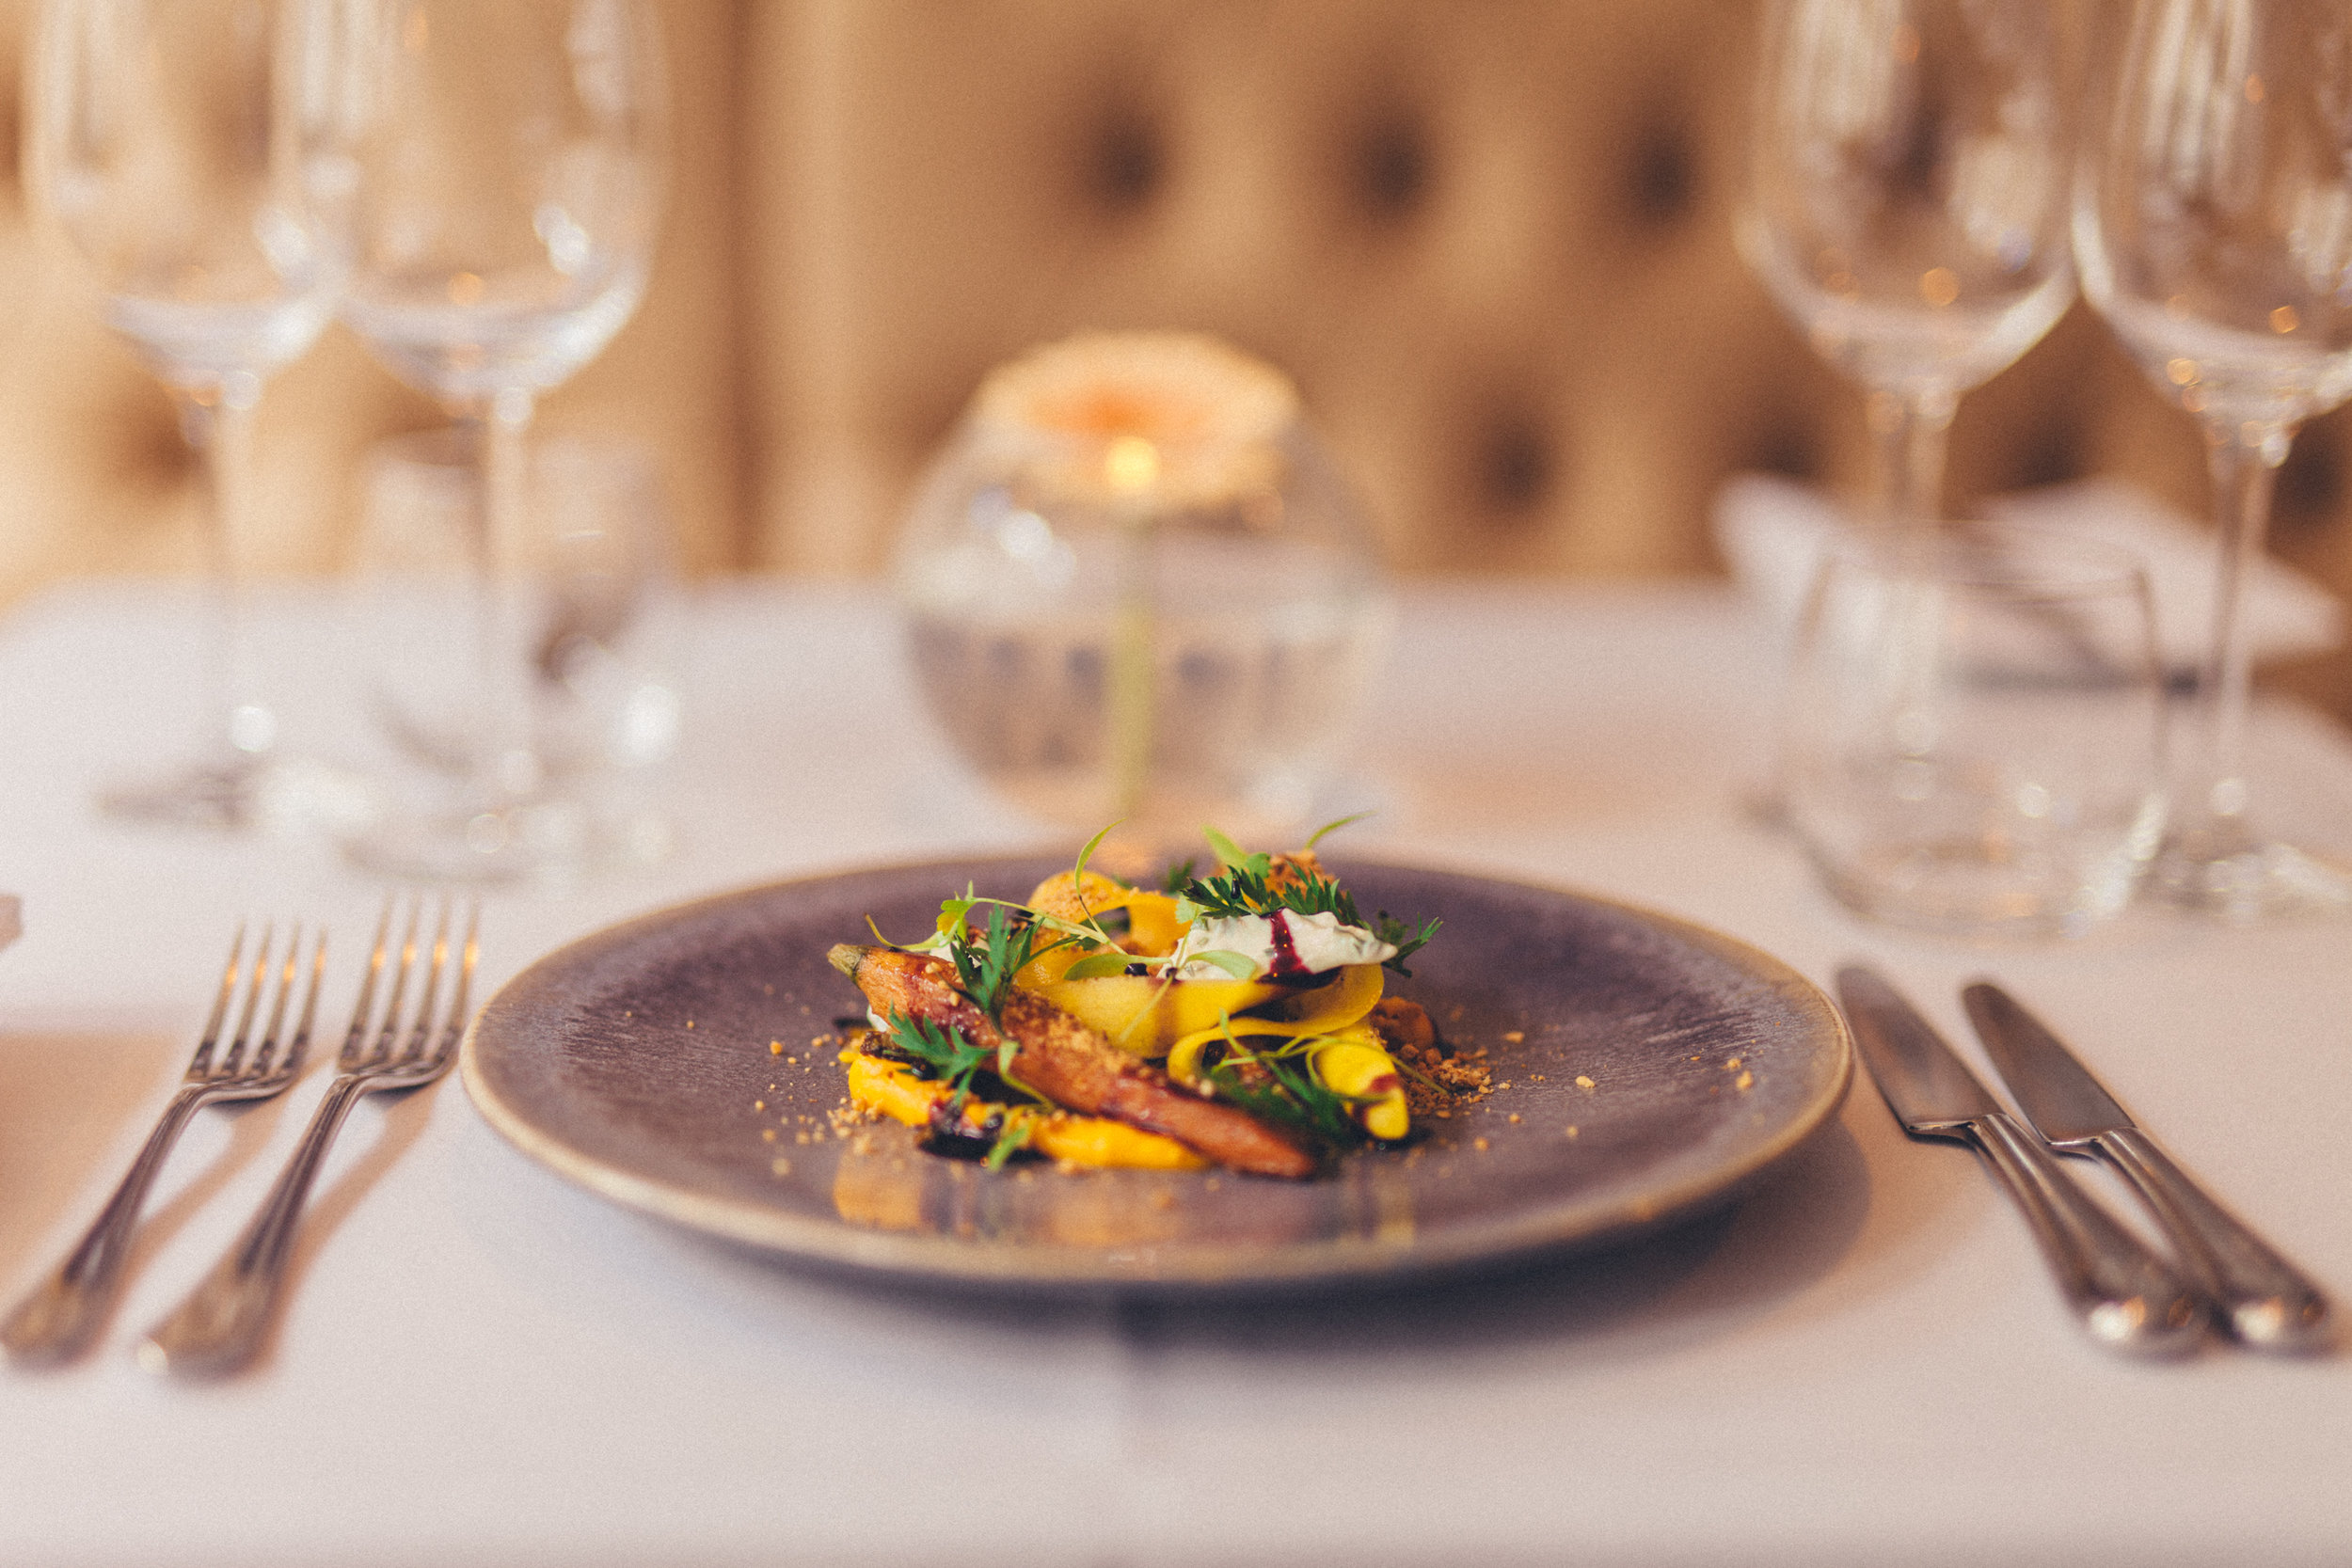 Beautifully plated food photography London restaurant